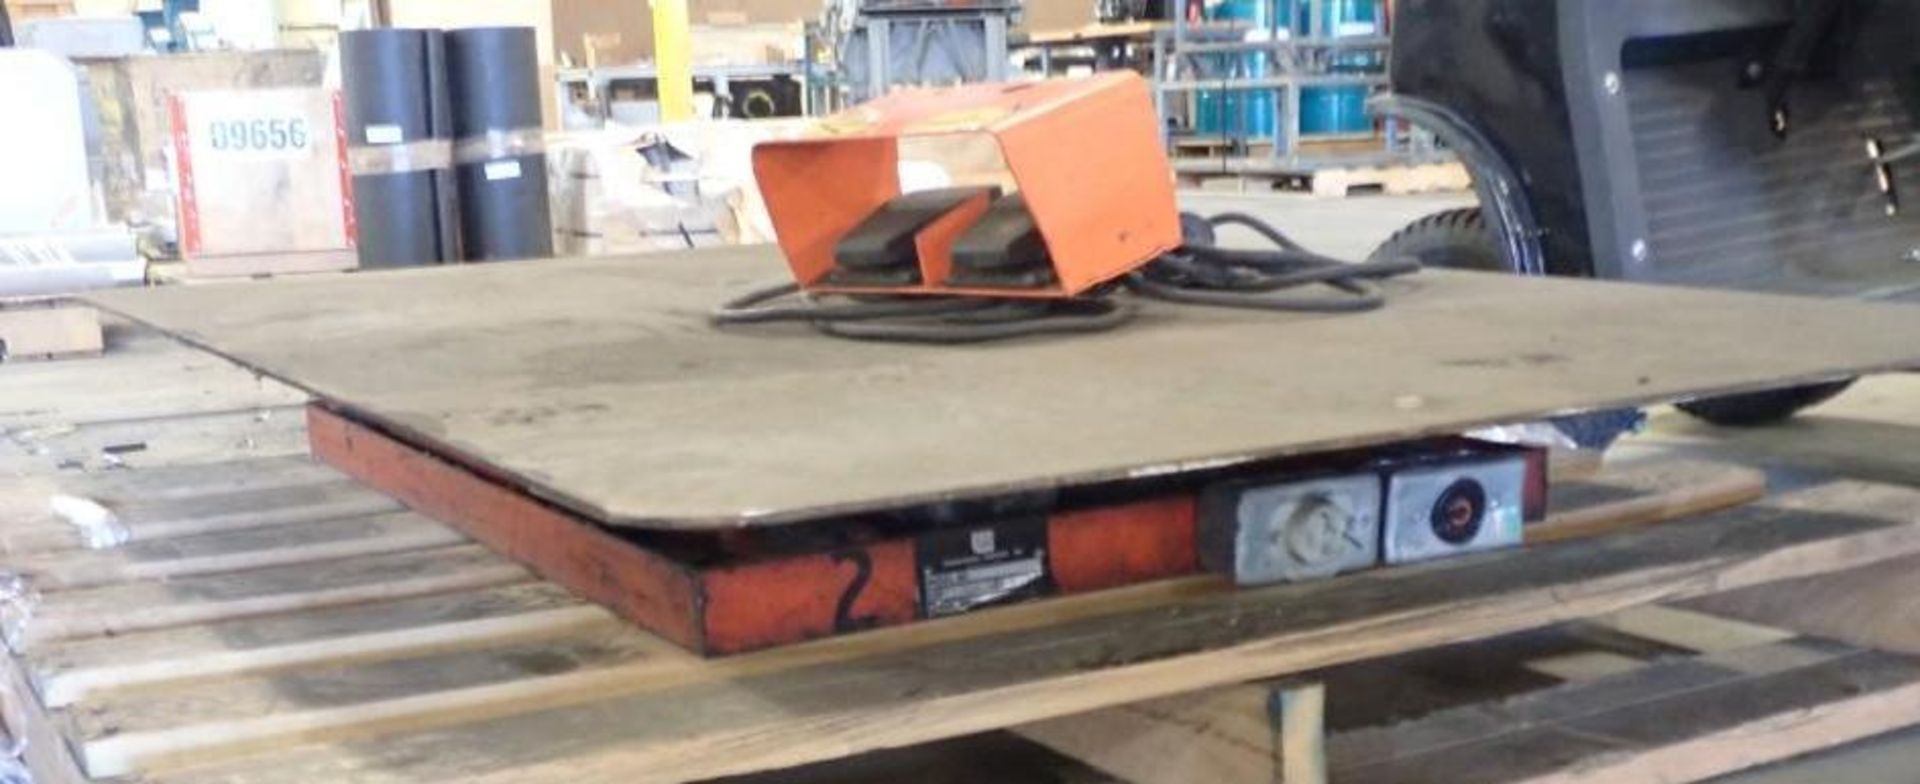 Lee Engineering 1000 Lb. Lift Table - Image 2 of 5